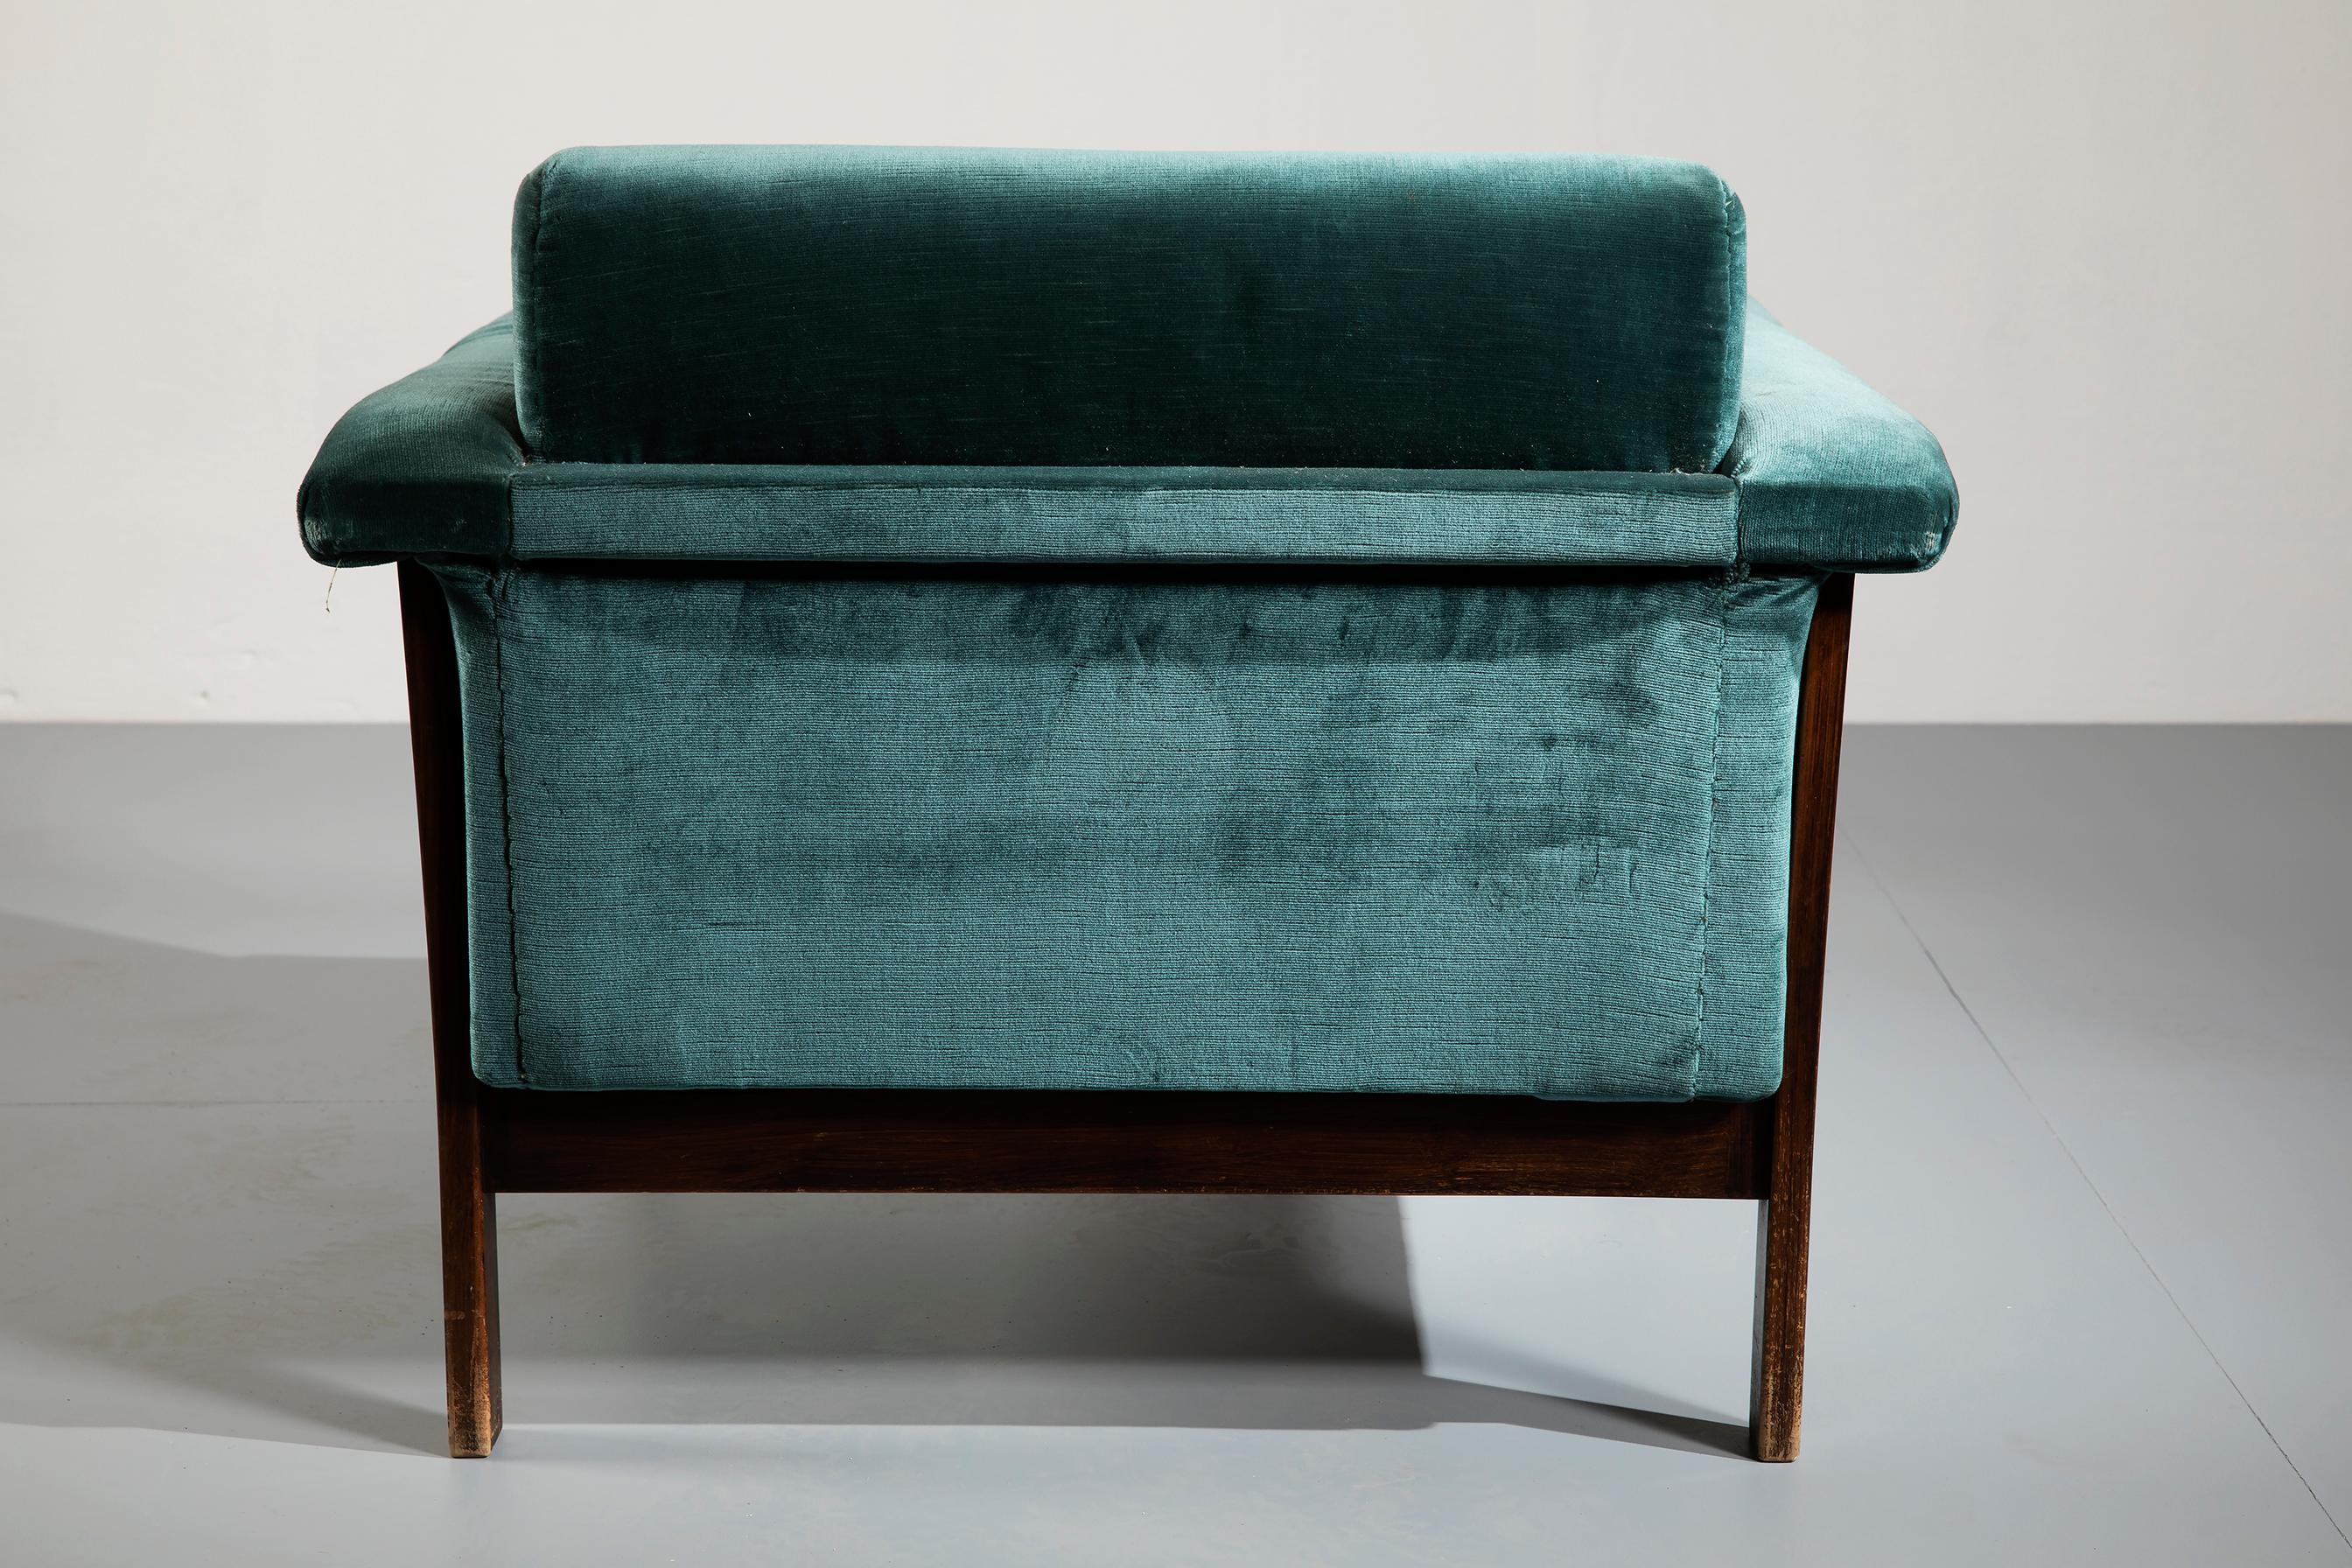 Ettore Sottsass Rosewood and Teal Fabric 'Canada' Armchair for Poltronova, 1958 For Sale 6